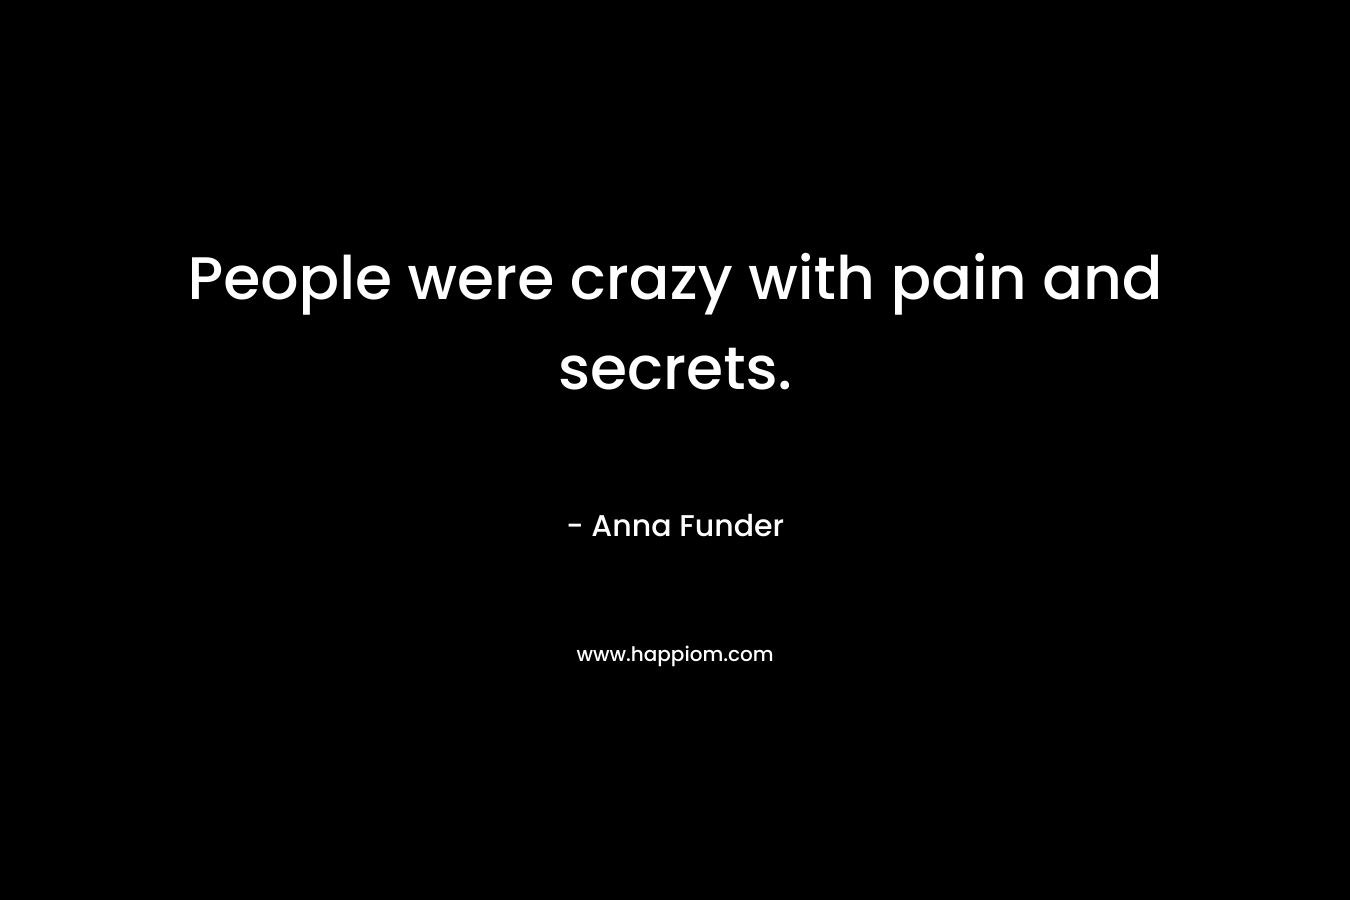 People were crazy with pain and secrets.